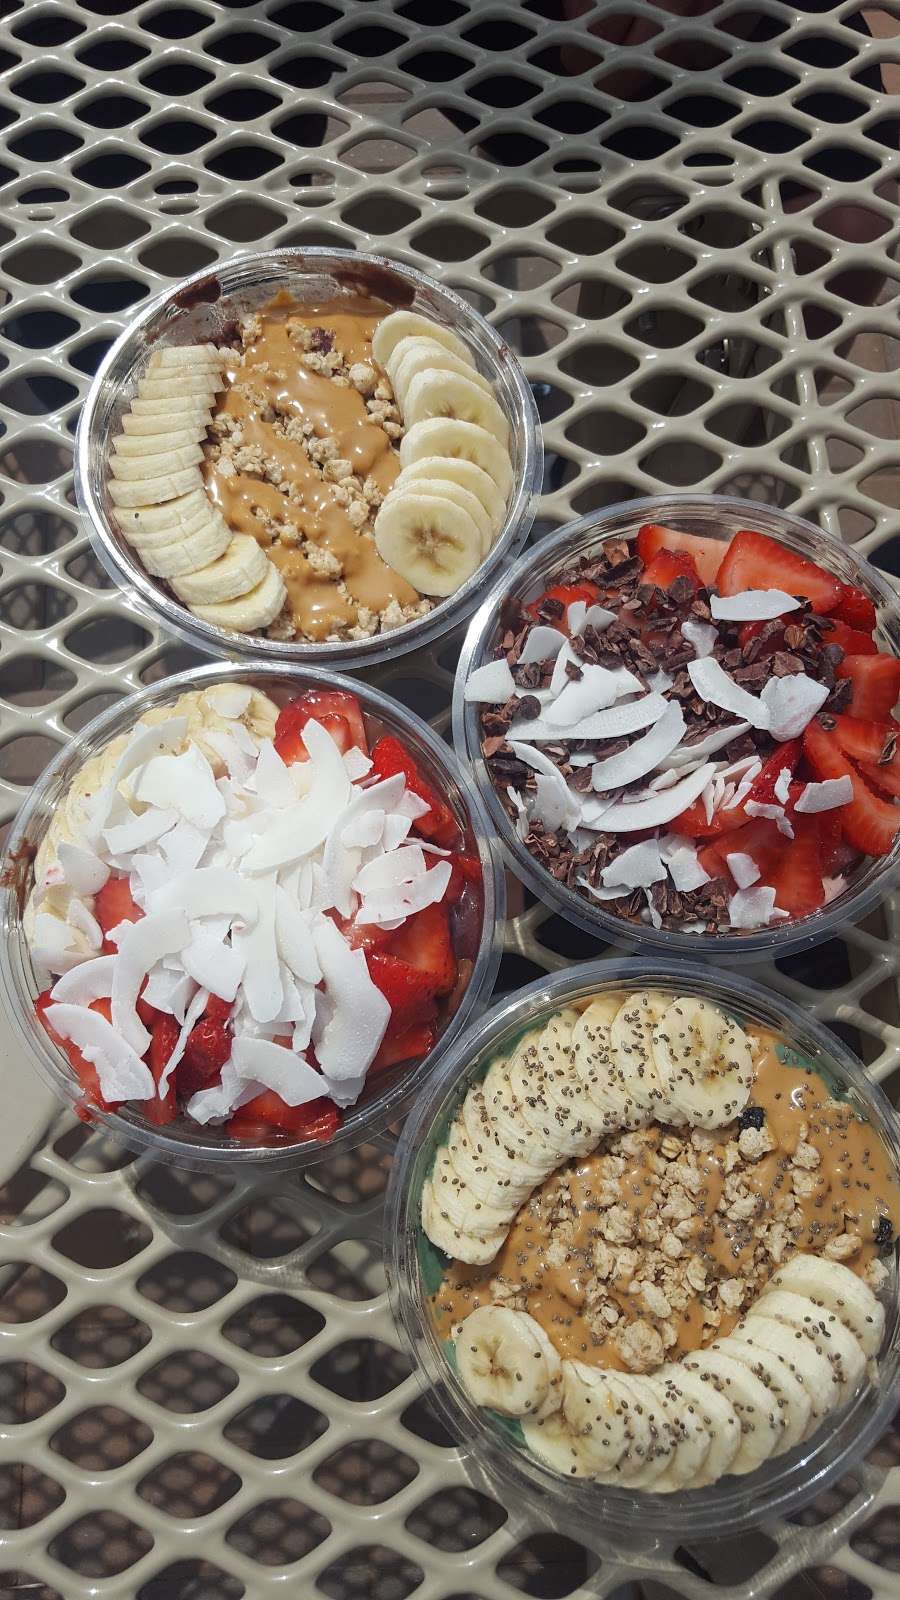 Playa Bowls | 44 Manchester Ave, Forked River, NJ 08731 | Phone: (609) 994-2828